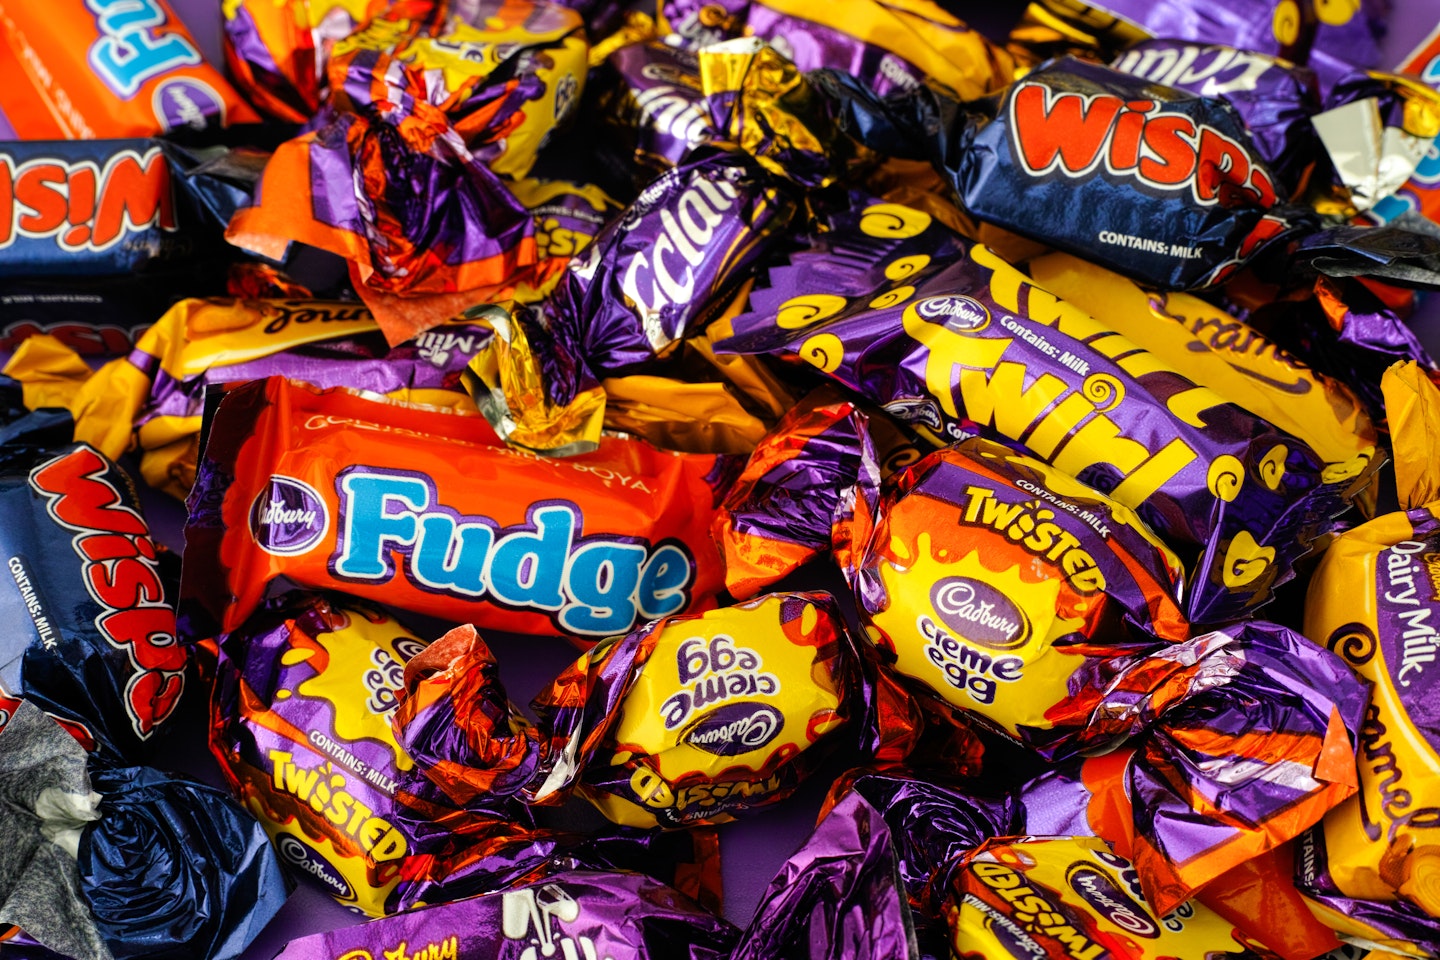 Stop what you’re doing! Cadbury’s are hiring CHOCOLATE TASTERS and it sounds like the perfect job